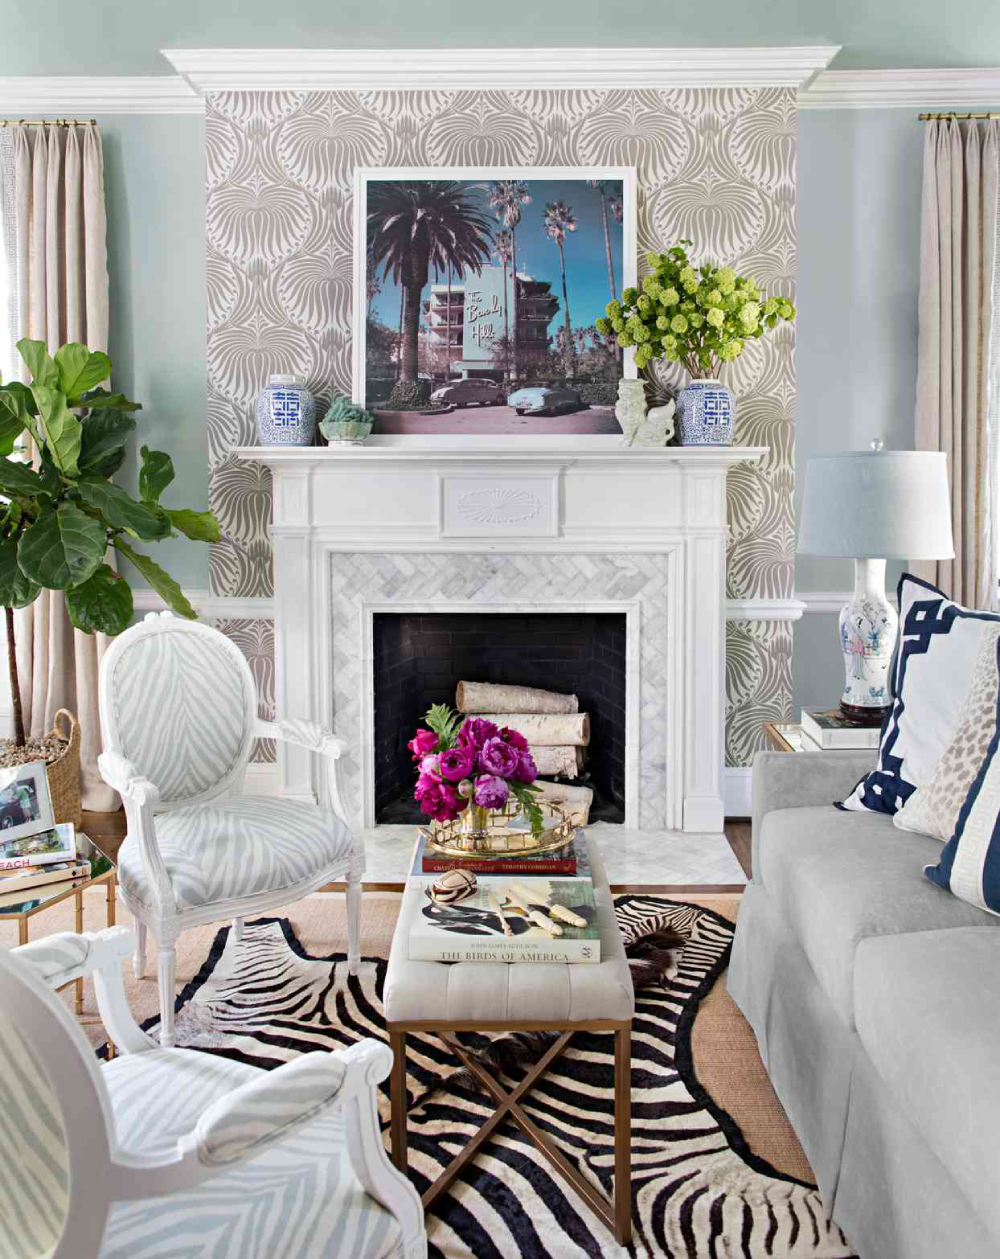 1-57 Fireplace mantel ideas to redecorate your room